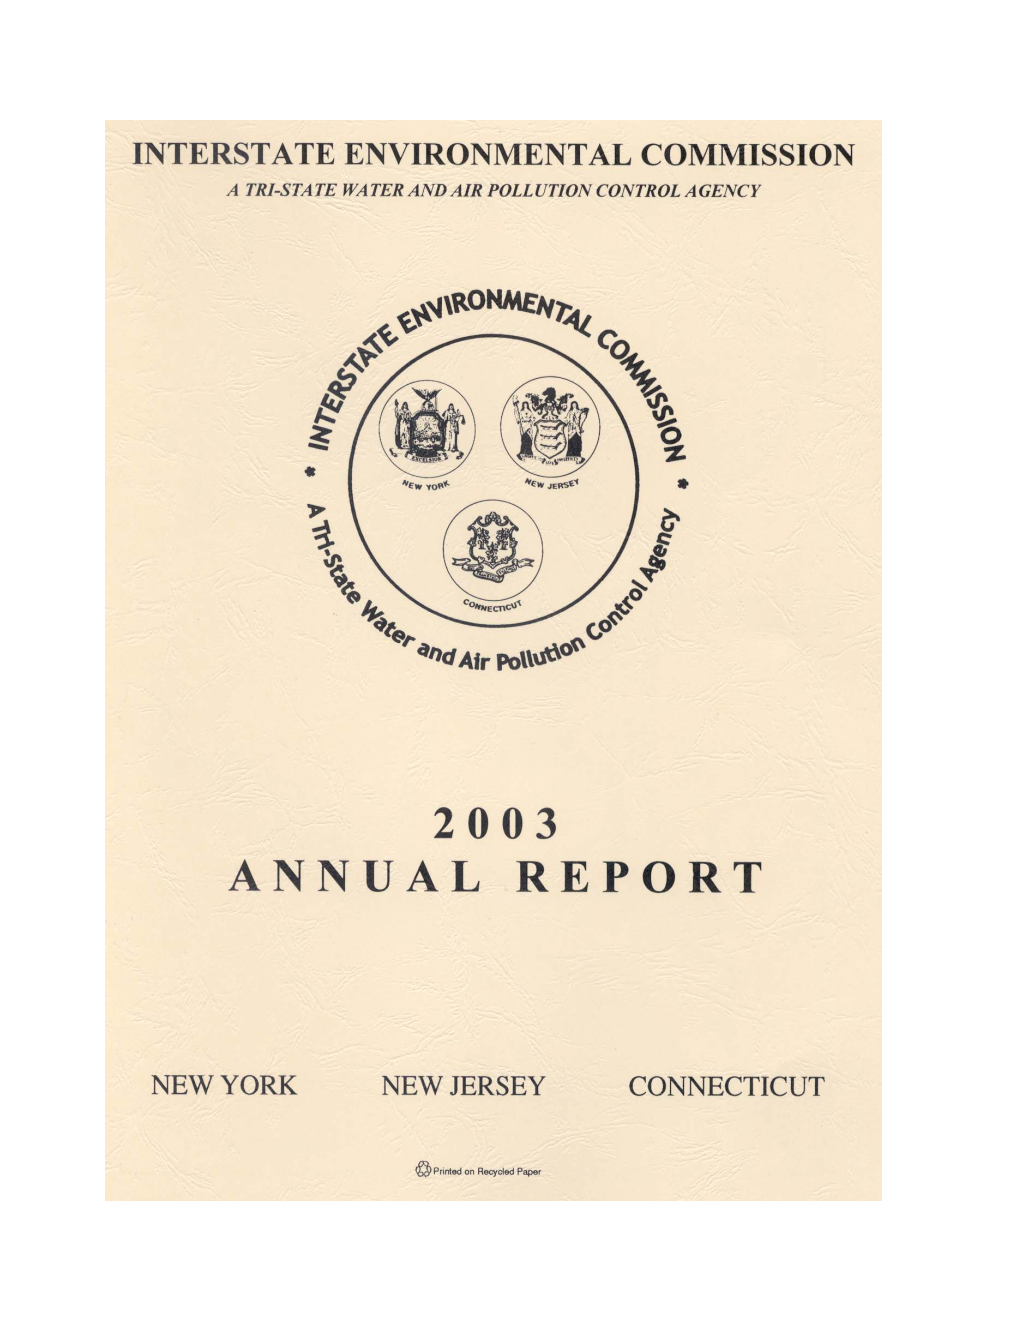 2003 Annual Report of the Interstate Environmental Commission